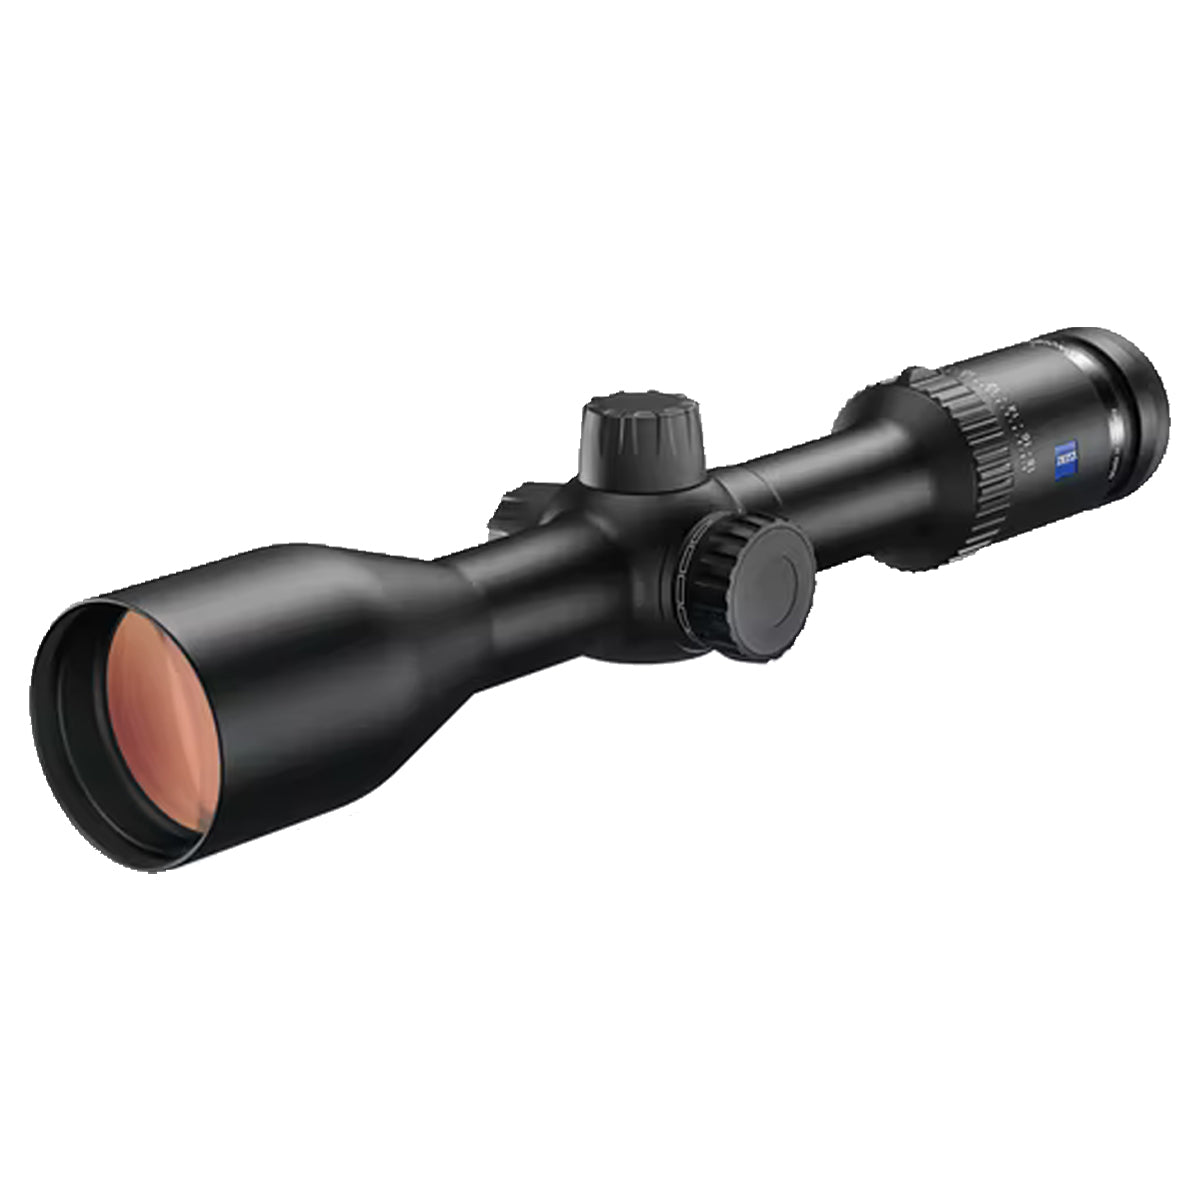 Zeiss Conquest V6 3-18x50 w/ZMOA-2 #94 Reticle Riflescope